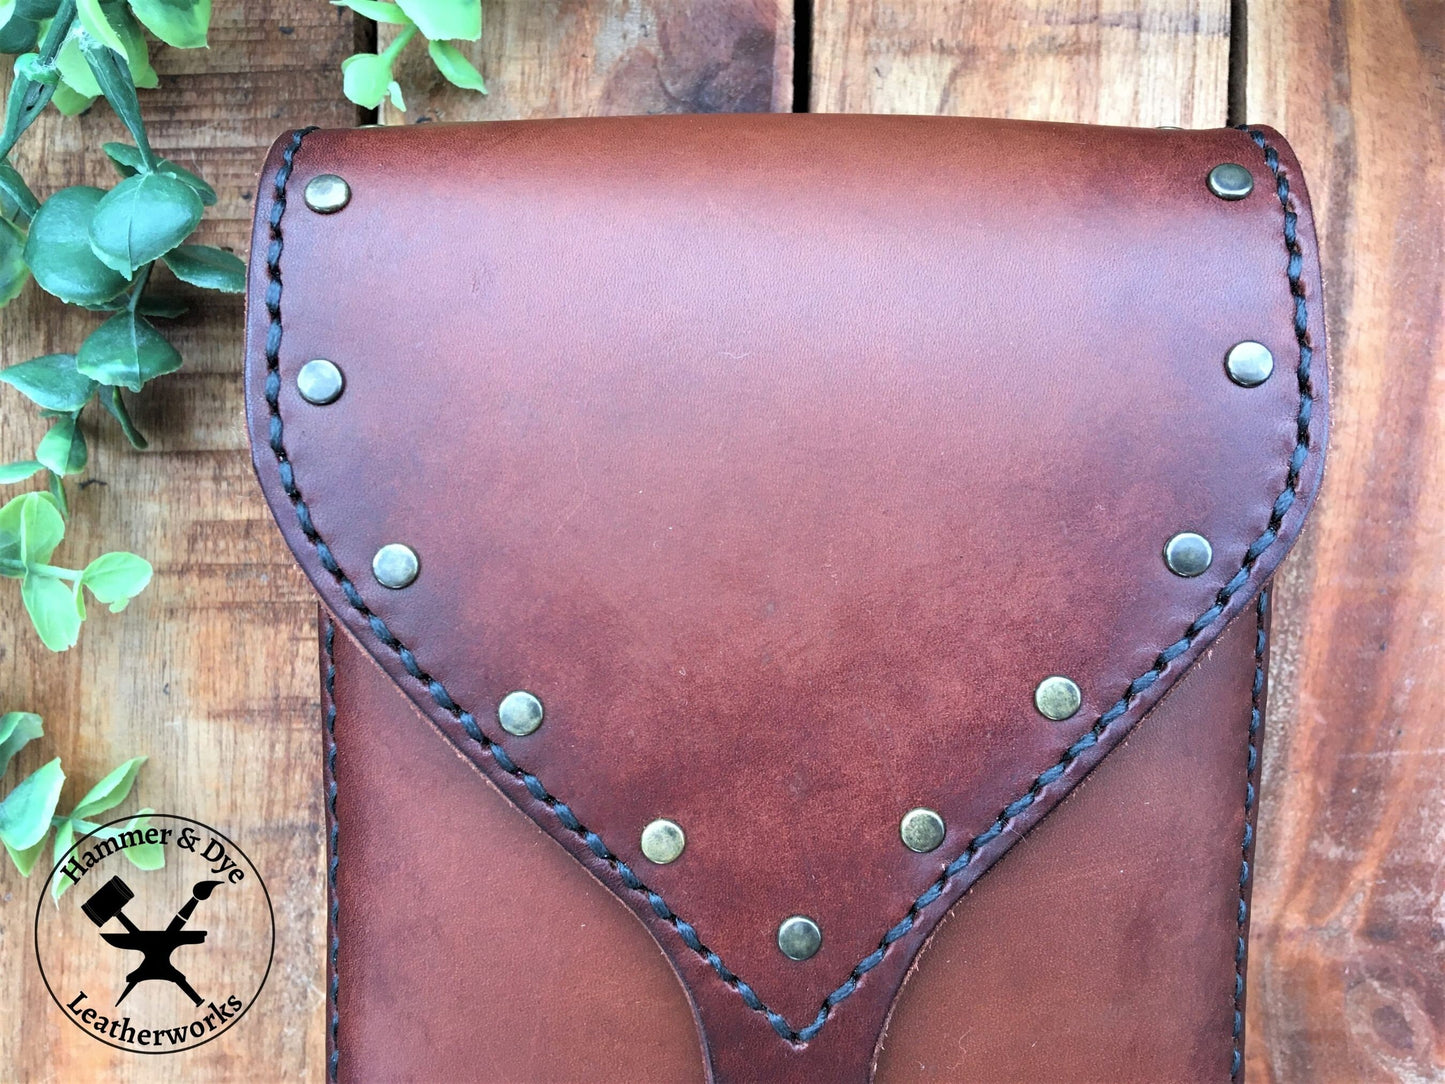 Large Handmade Brown Leather Belt Pouch with Buckle closing and Studs  Close Up View